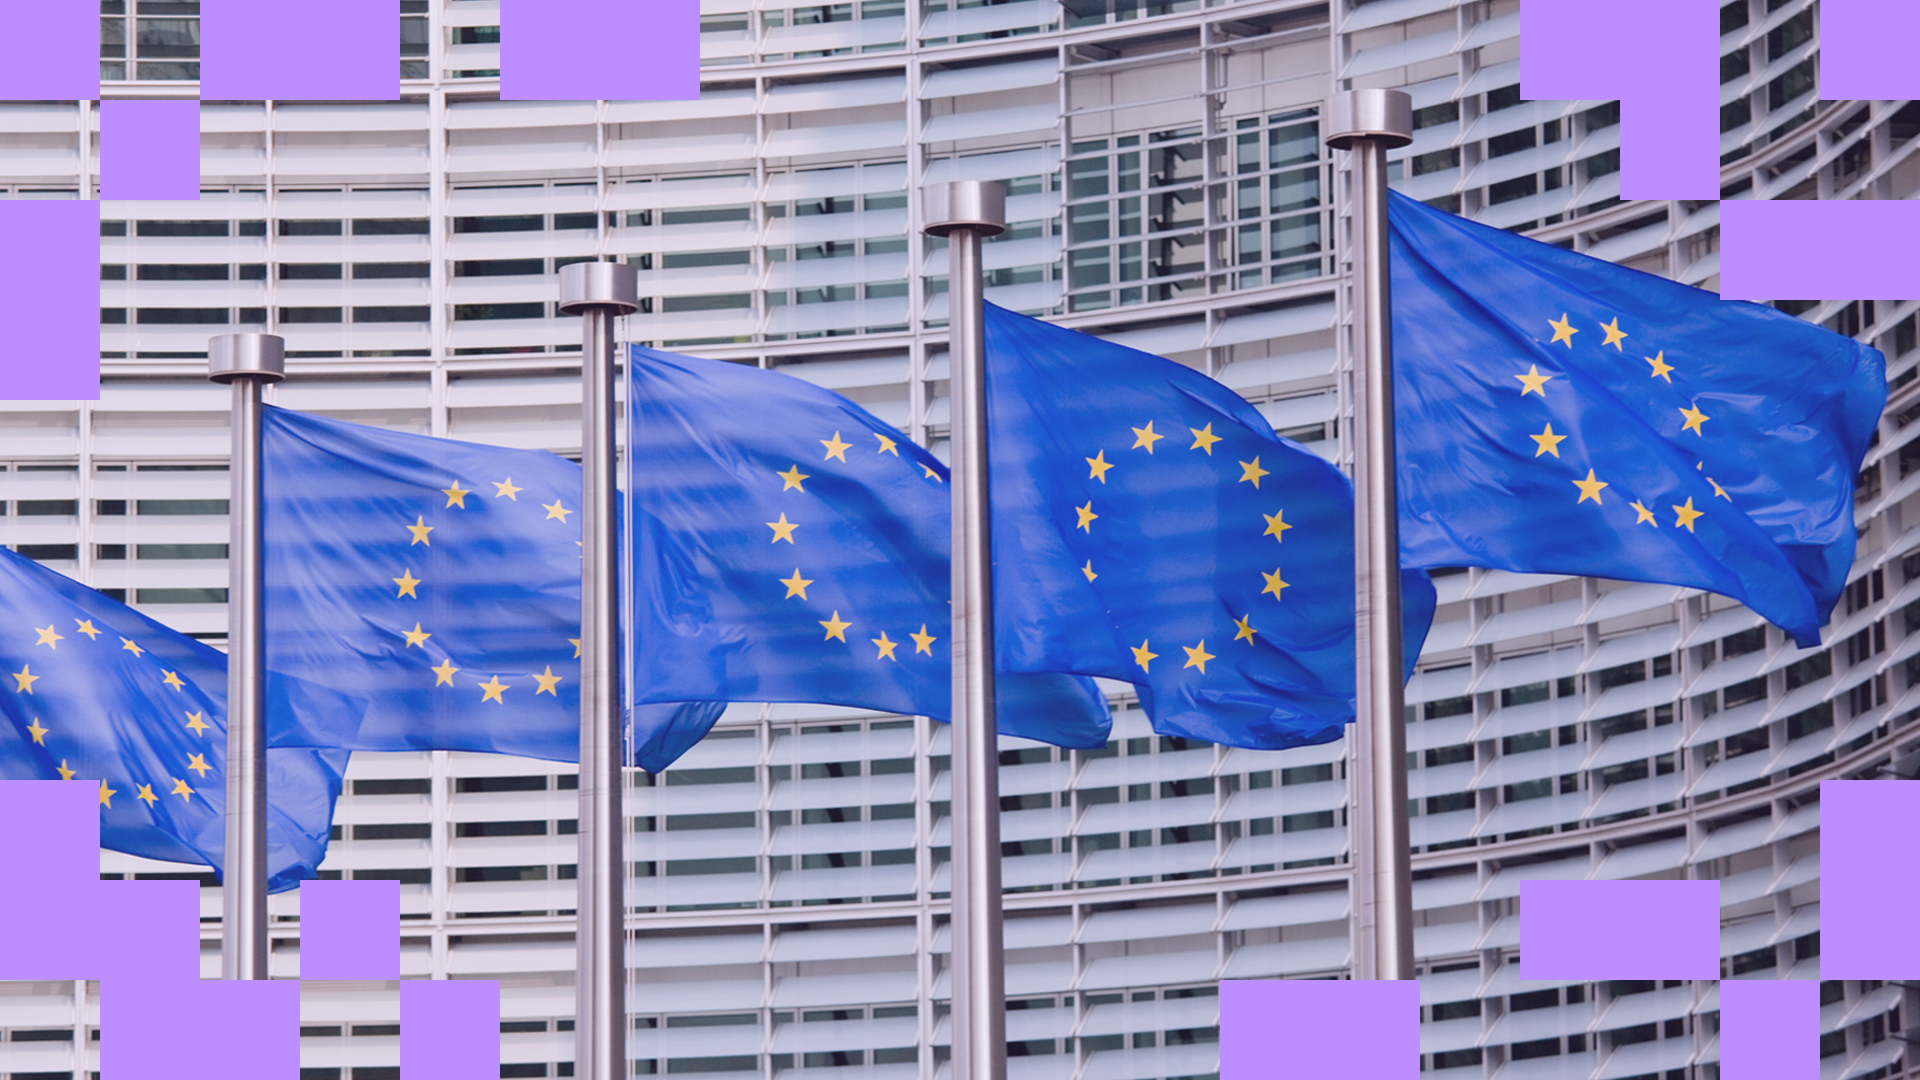 Five European Union flags waving in front of an EU building, with purple pixelized elements, part of the visual identity for EUANDI, the voting advice application developed by the European University Institute, integrated into the image.